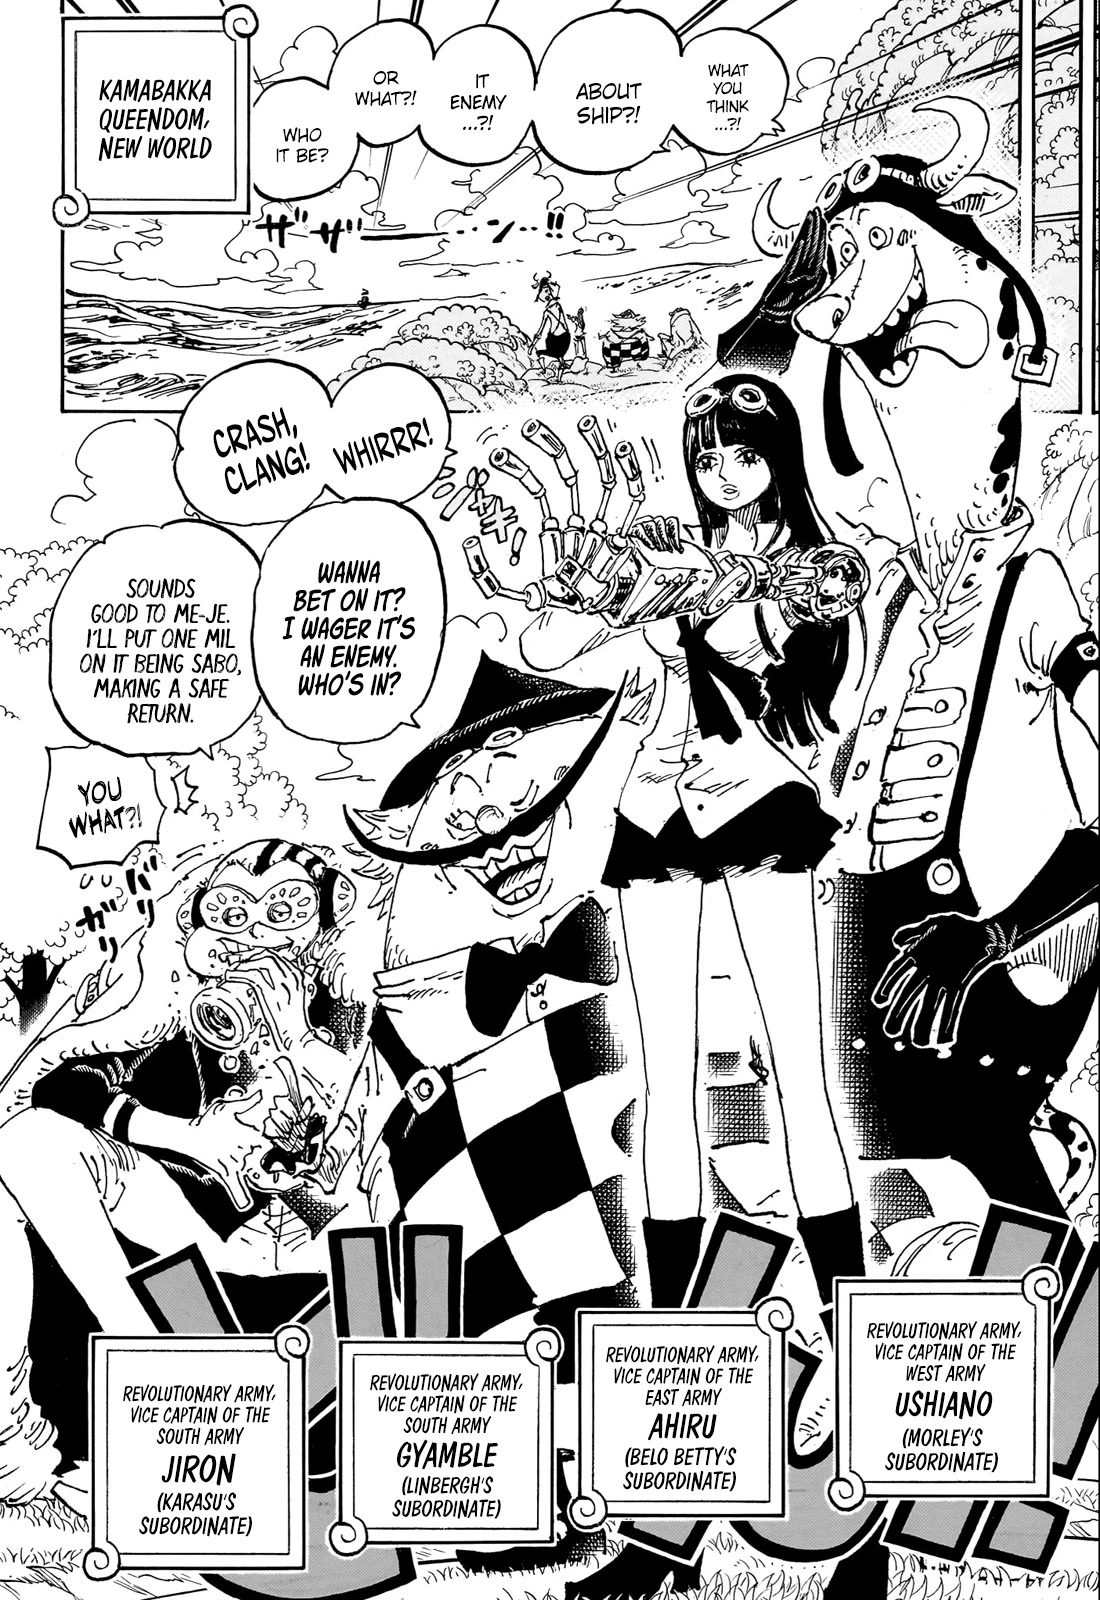 One Piece, Chapter 1082 Let